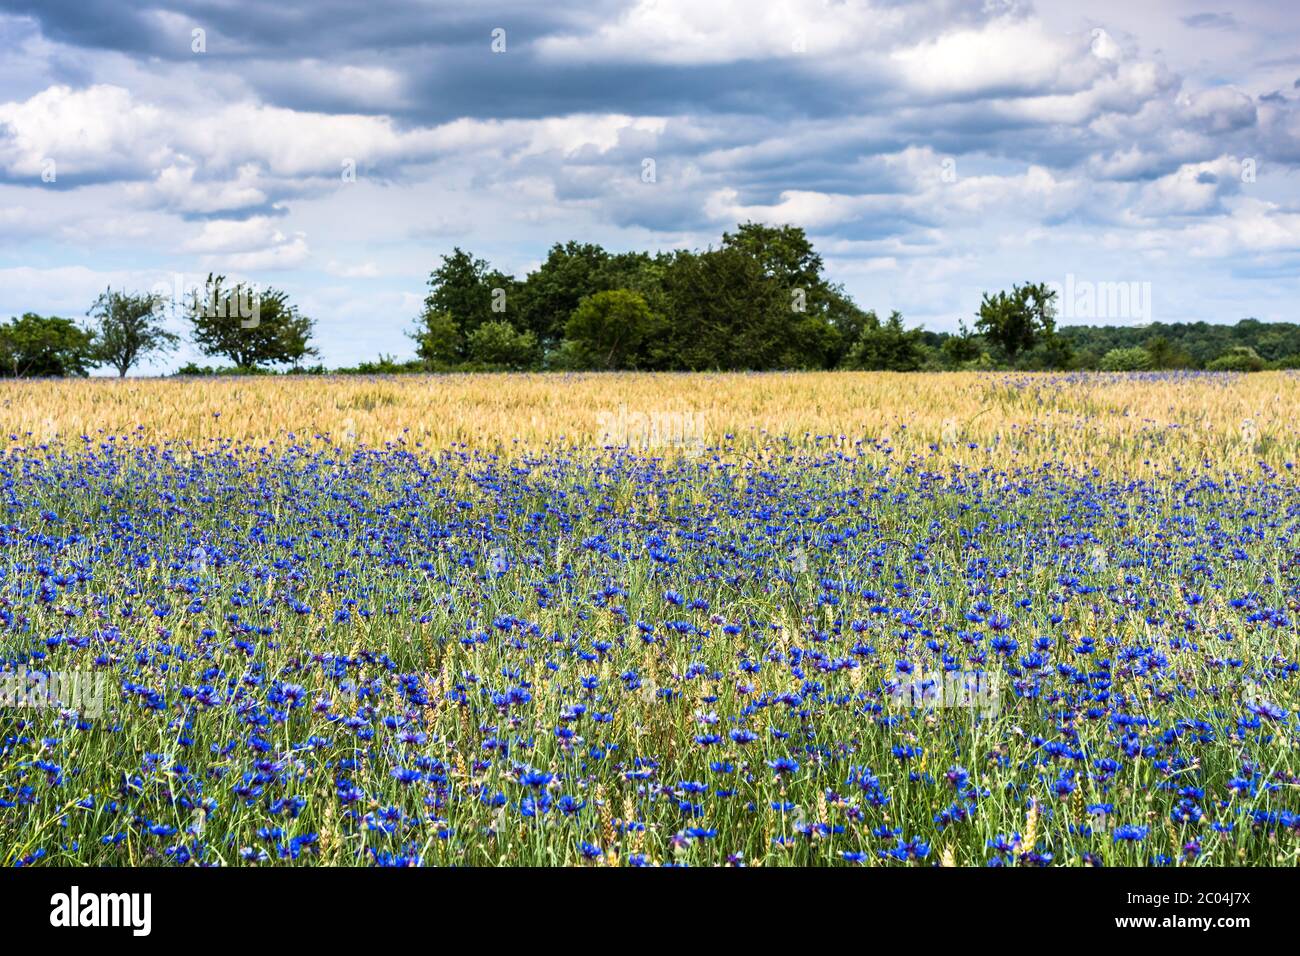 Wild Cornflowers (Centaurea cyanus) growing in cornfield on farmland in the Brenne National Park and Nature Reserve, Indre, France. Stock Photo